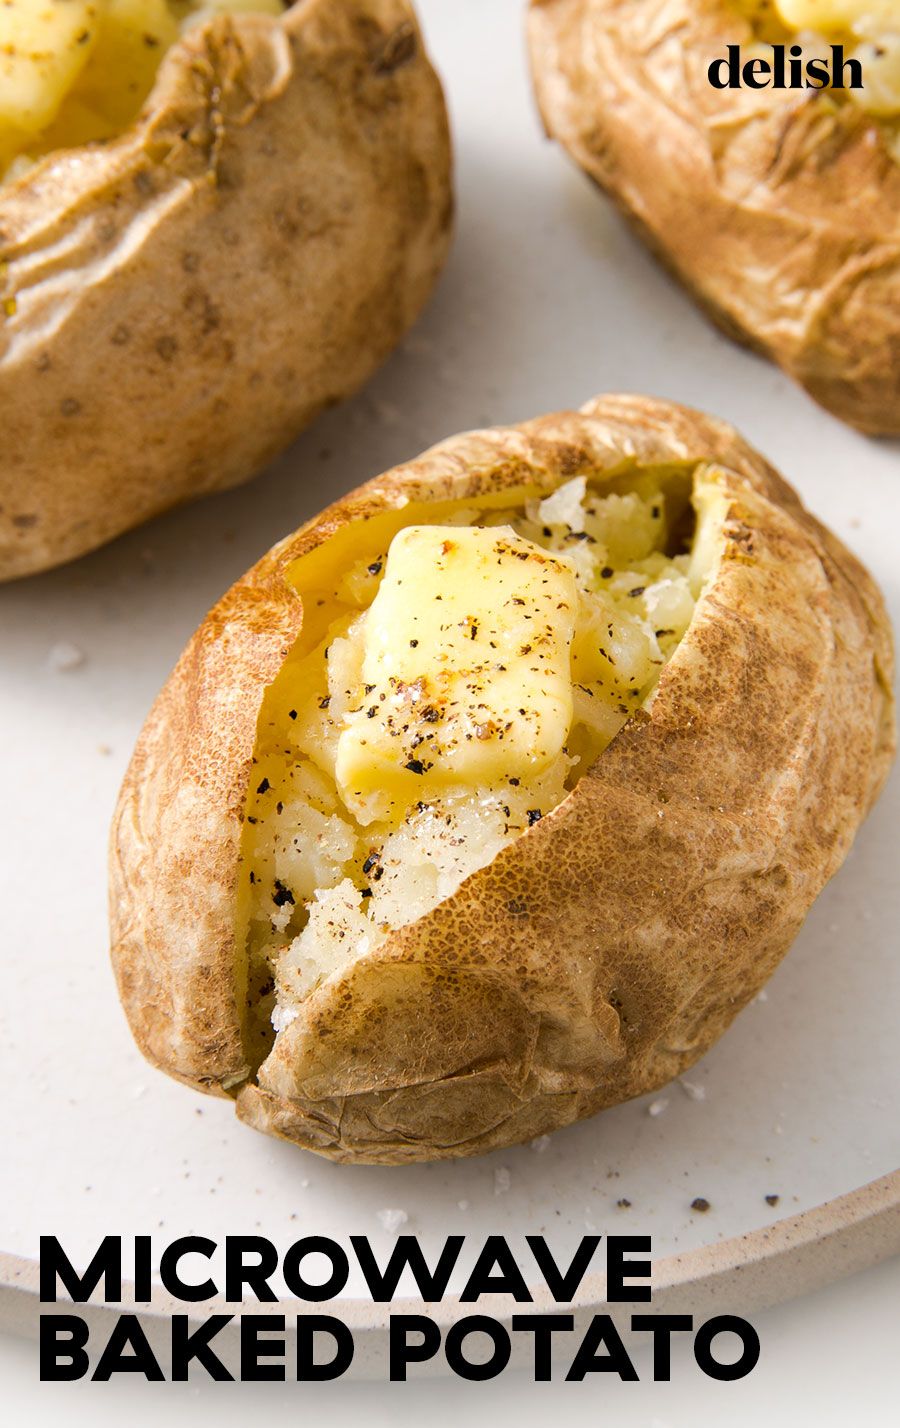 Jacket Potato Recipe Oven And Microwave